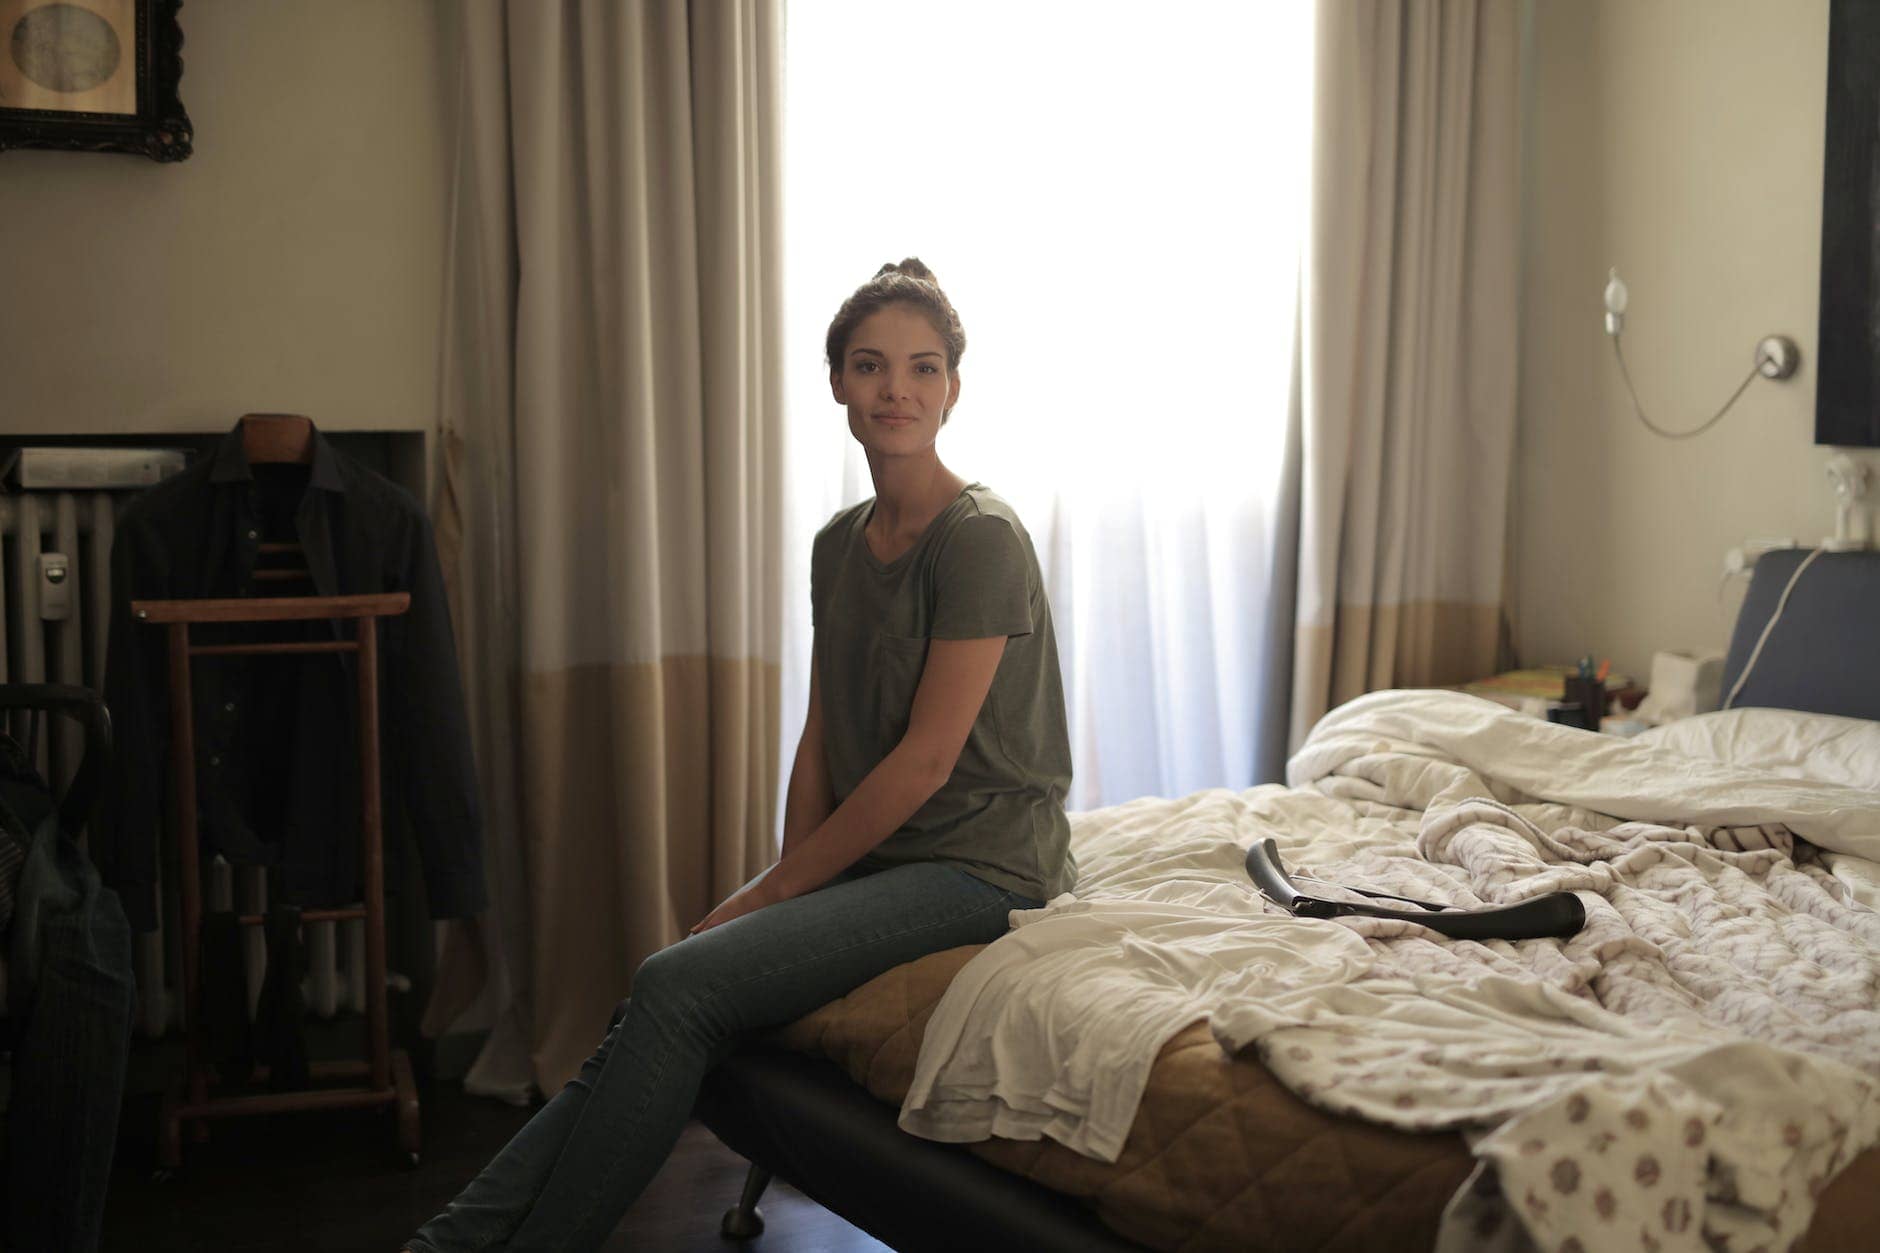 woman sitting on bed